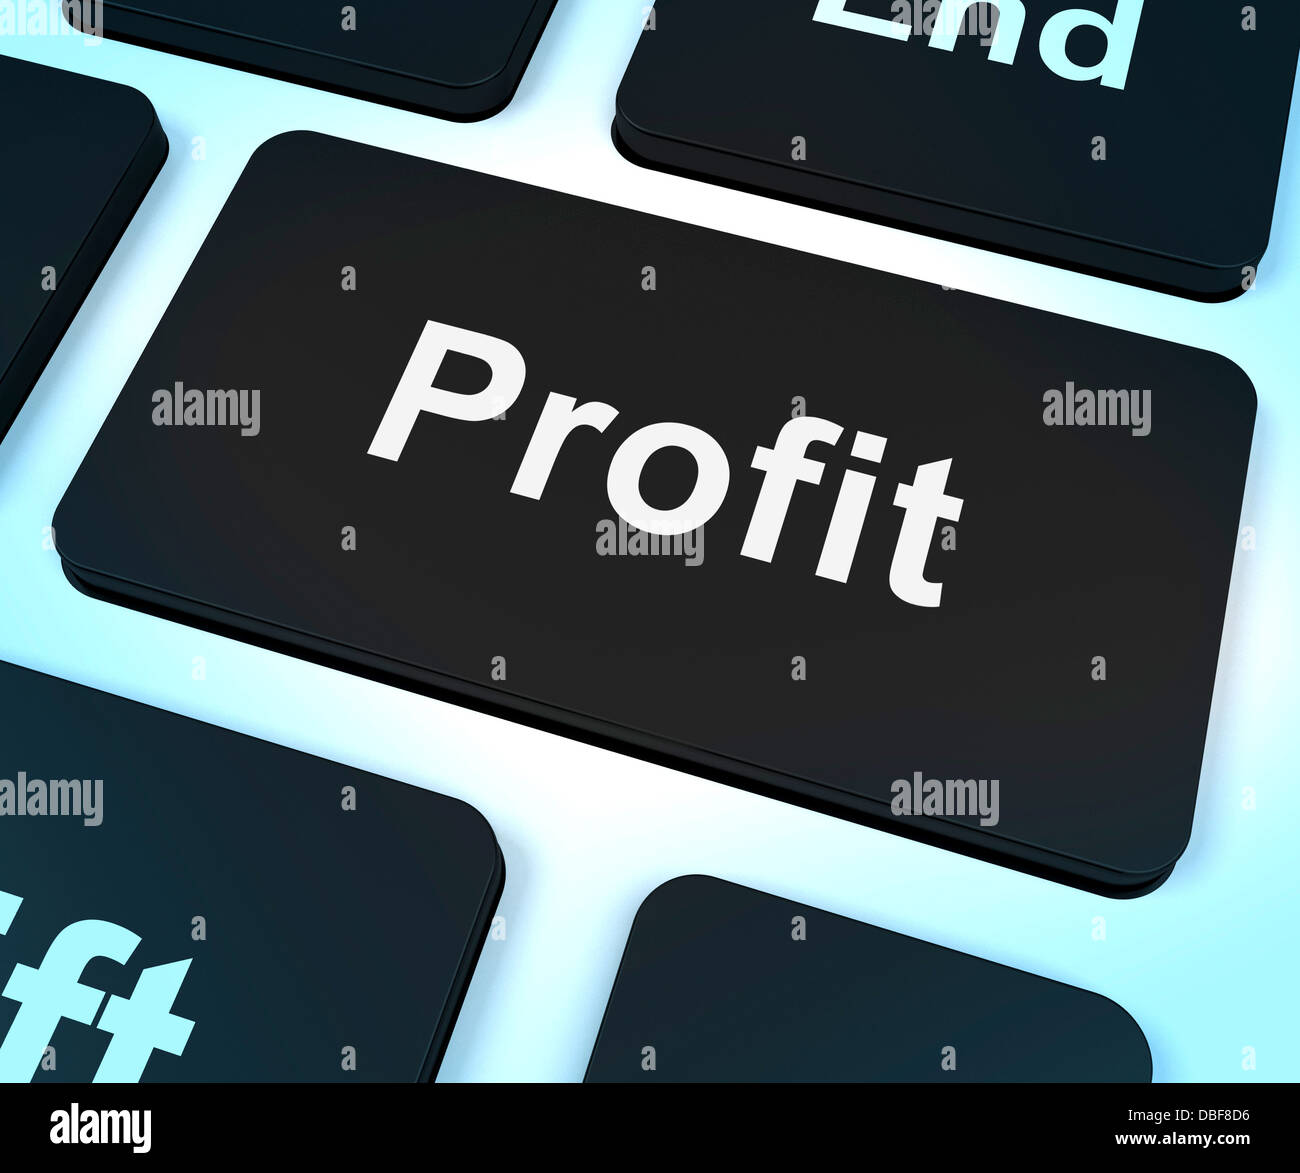 Profit Computer Key Showing Earnings And Investment Stock Photo